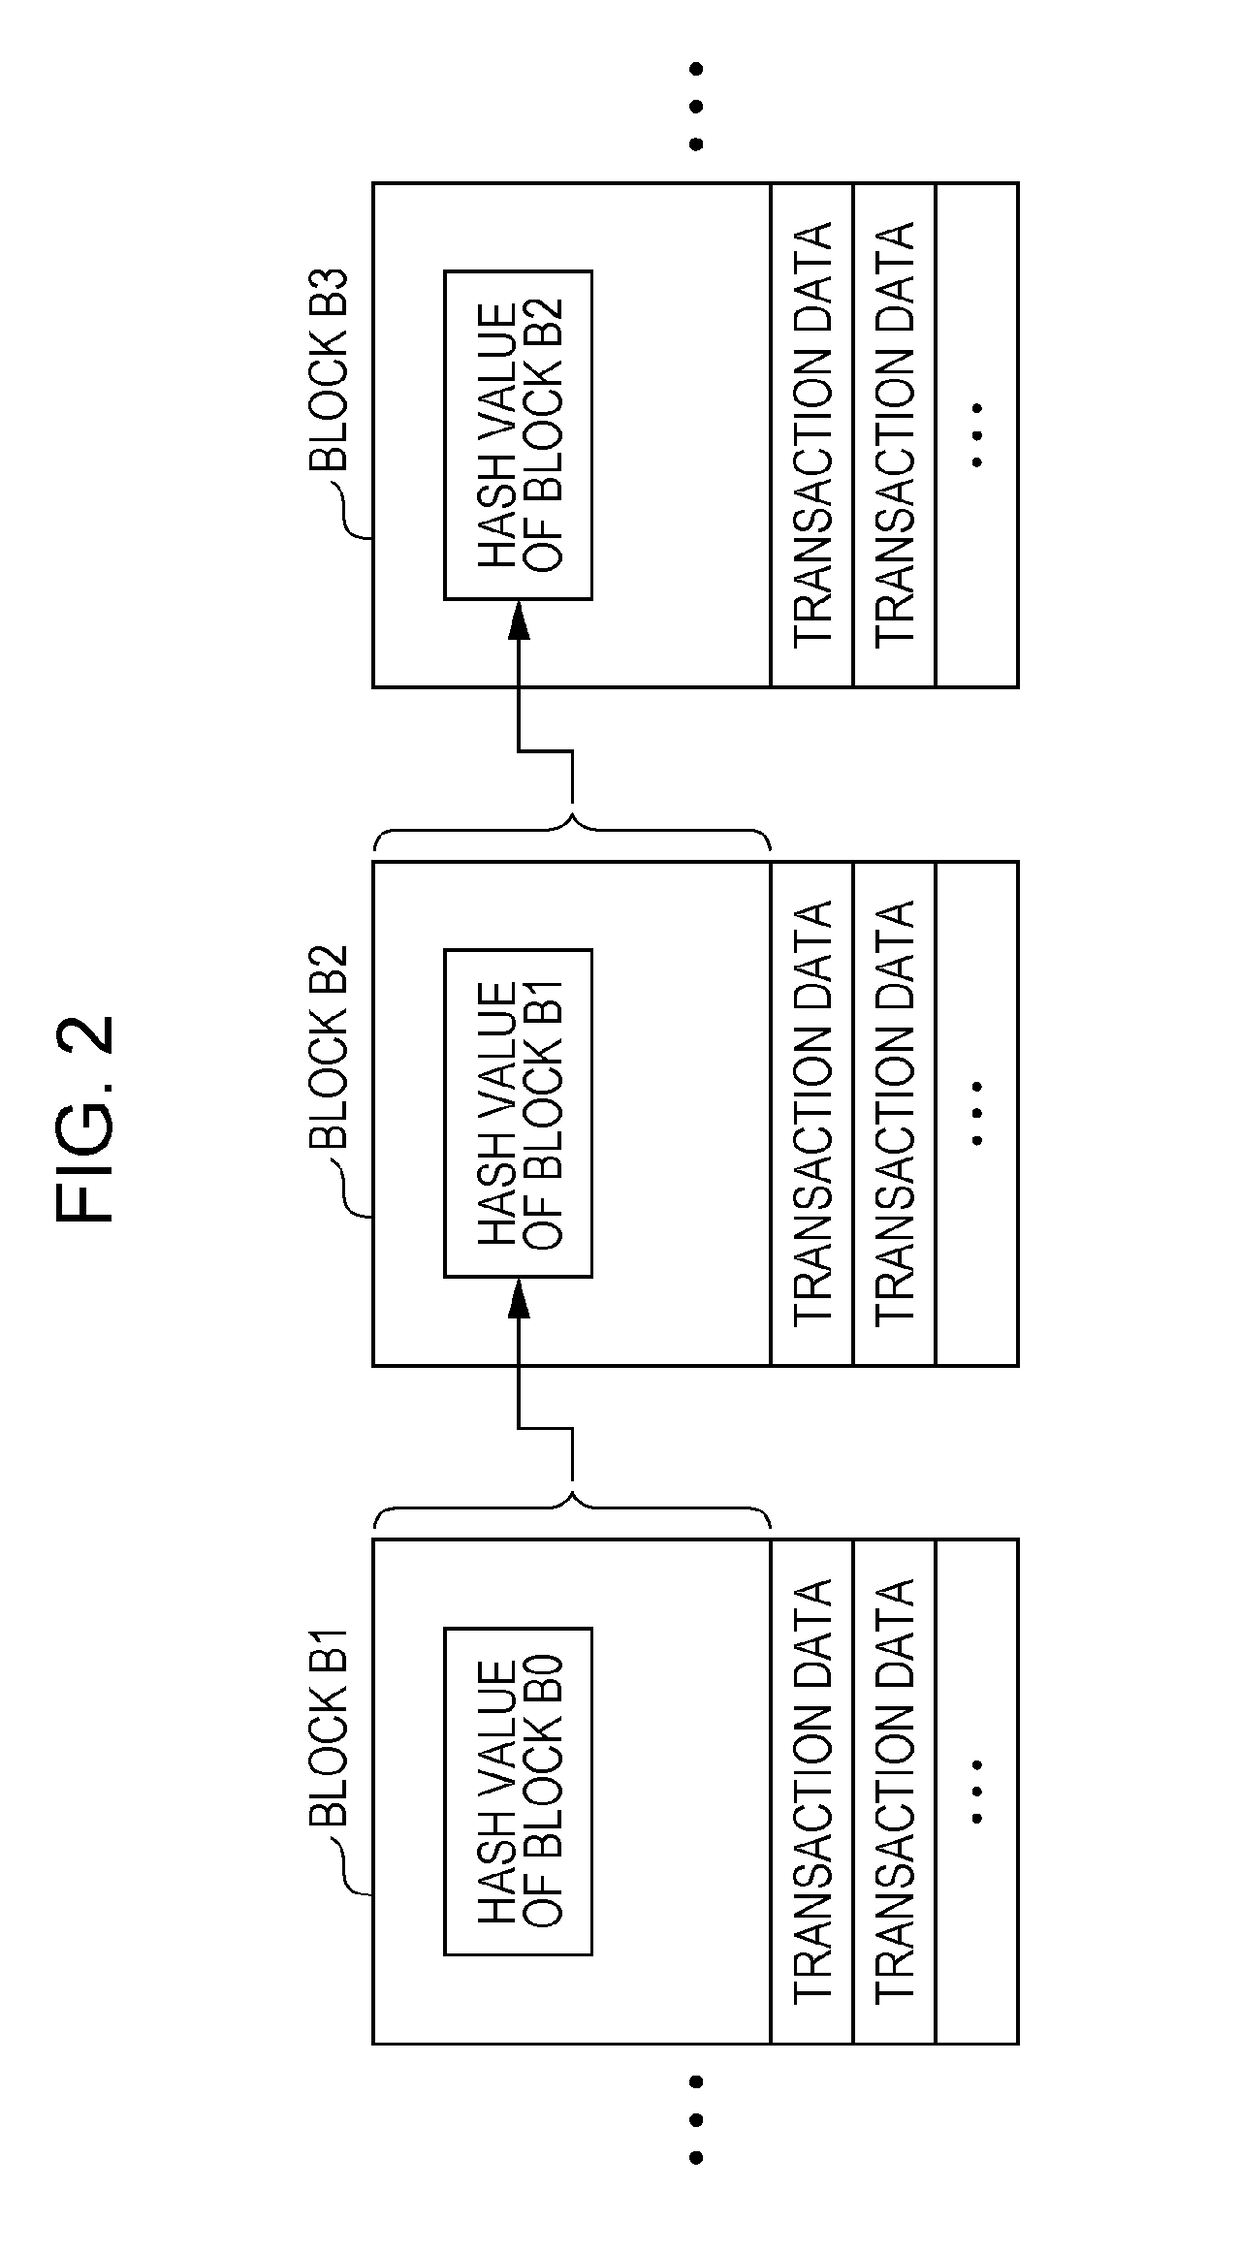 Electronic voting system and control method